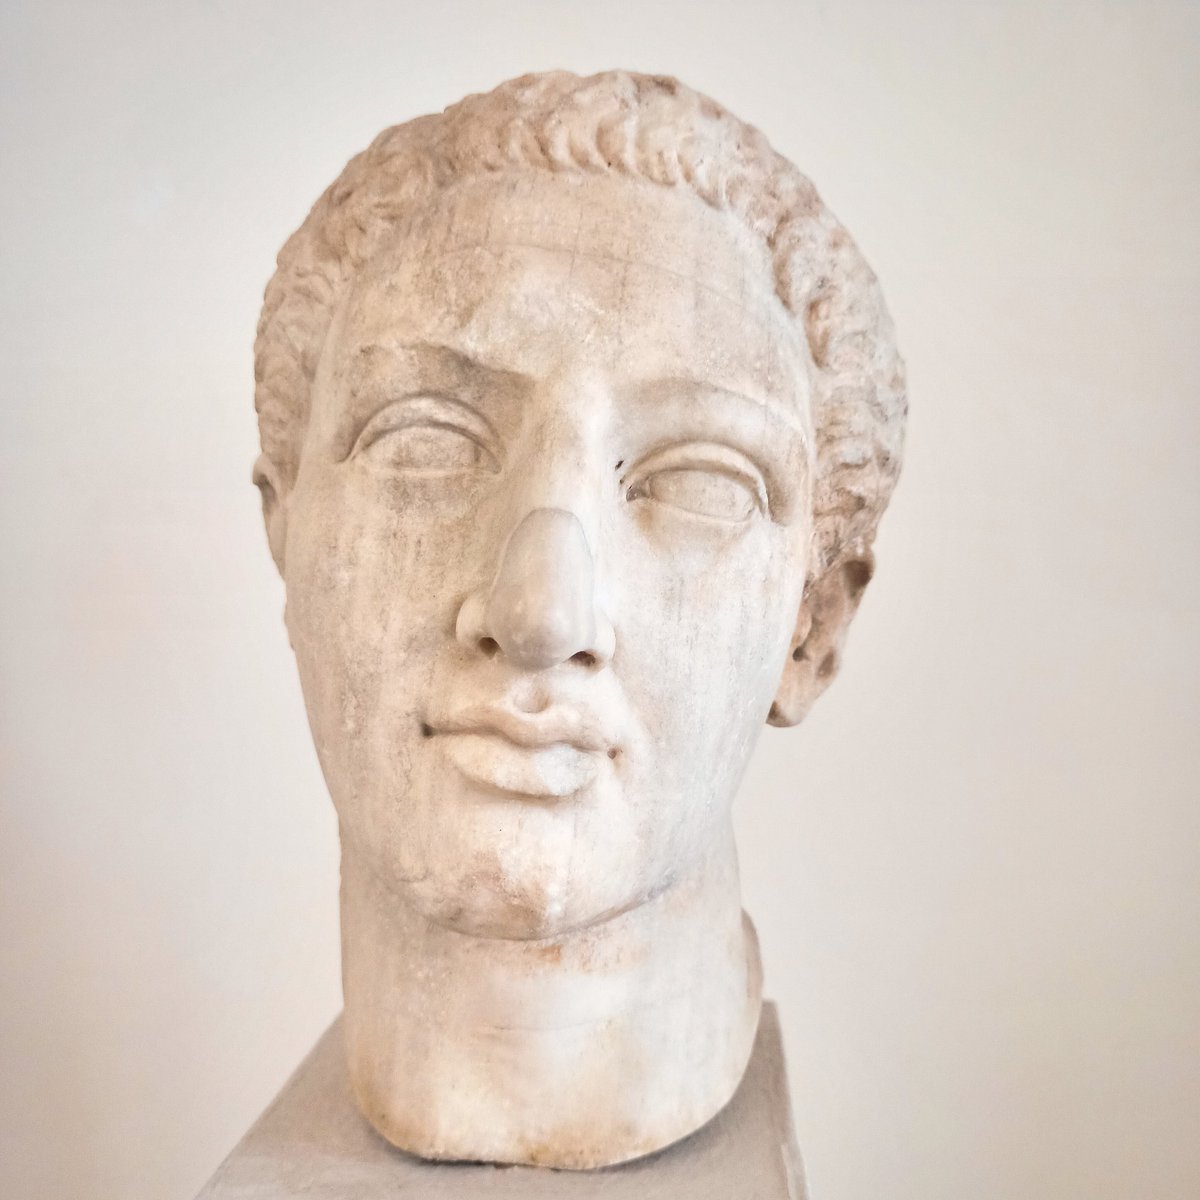 Portrait of a youth, eastern Greek workshop, 80-50 BC, Jacopo Contarini collection, on display in room 6 #museum #Venice #Archaeology #portrait #collection